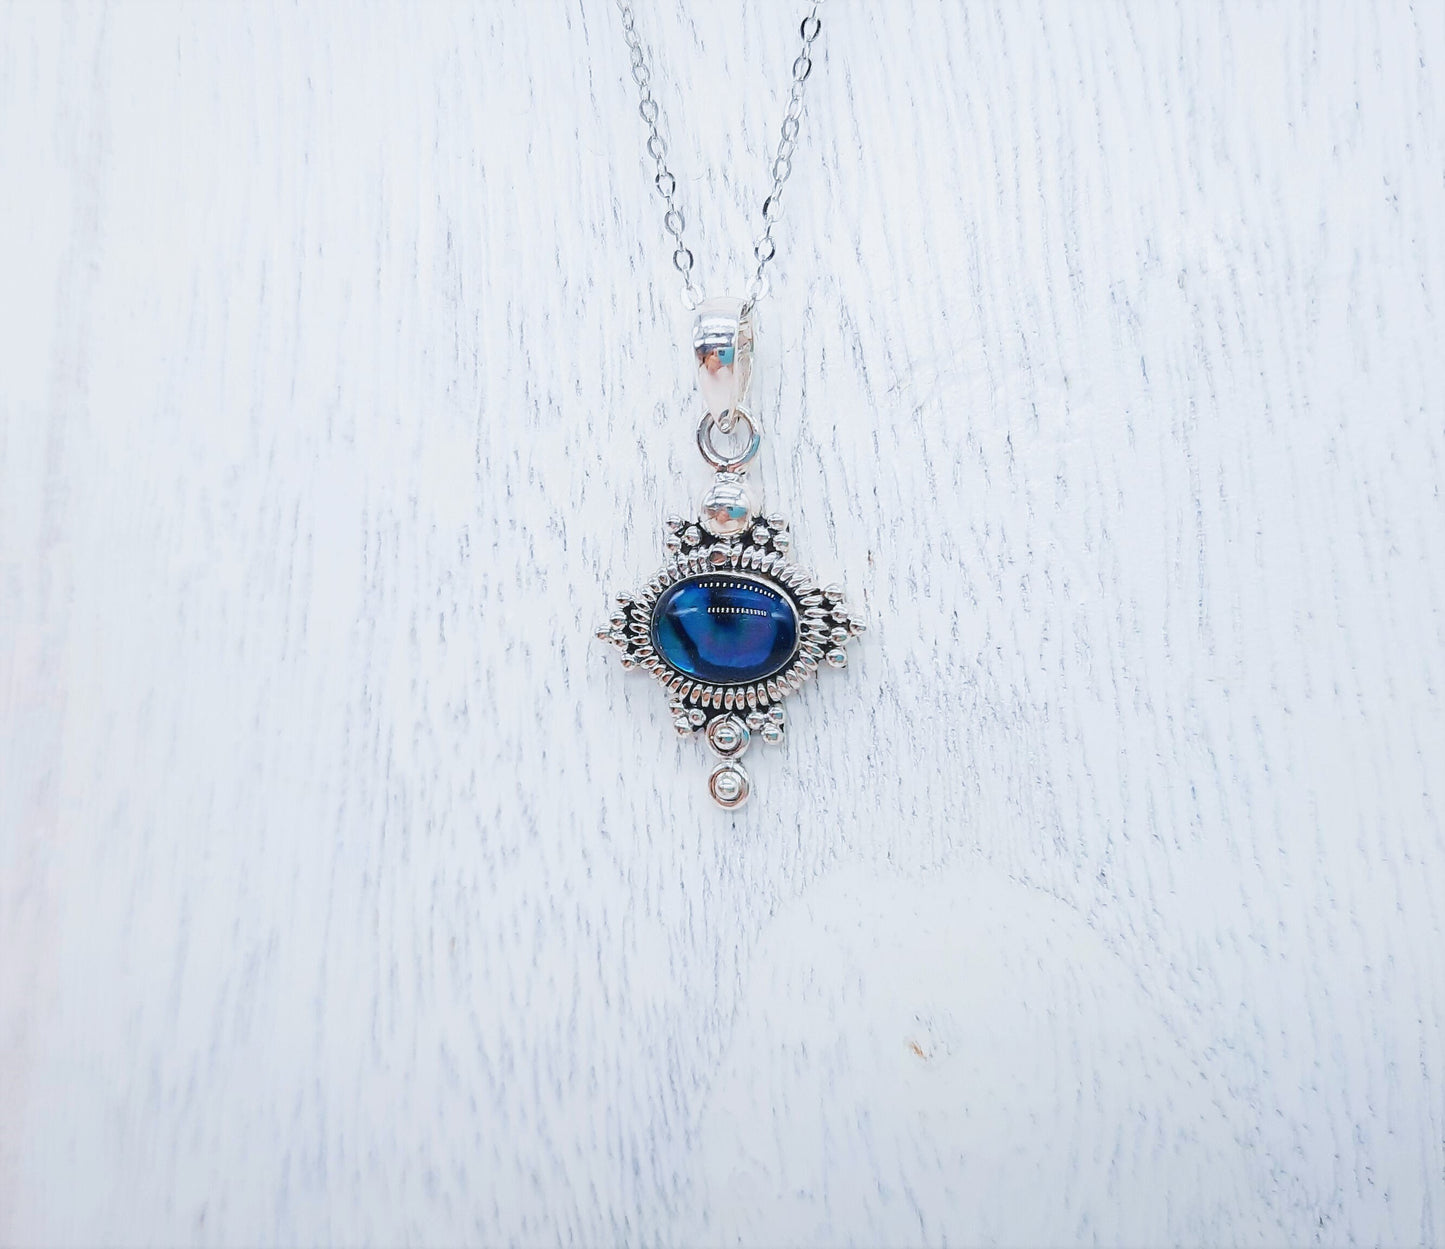 Genuine Blue Abalone Shell 925 Sterling Silver Pendant Necklace with 8x6mm Cabochon Setting Covered with Holographic Powder Infused Resin